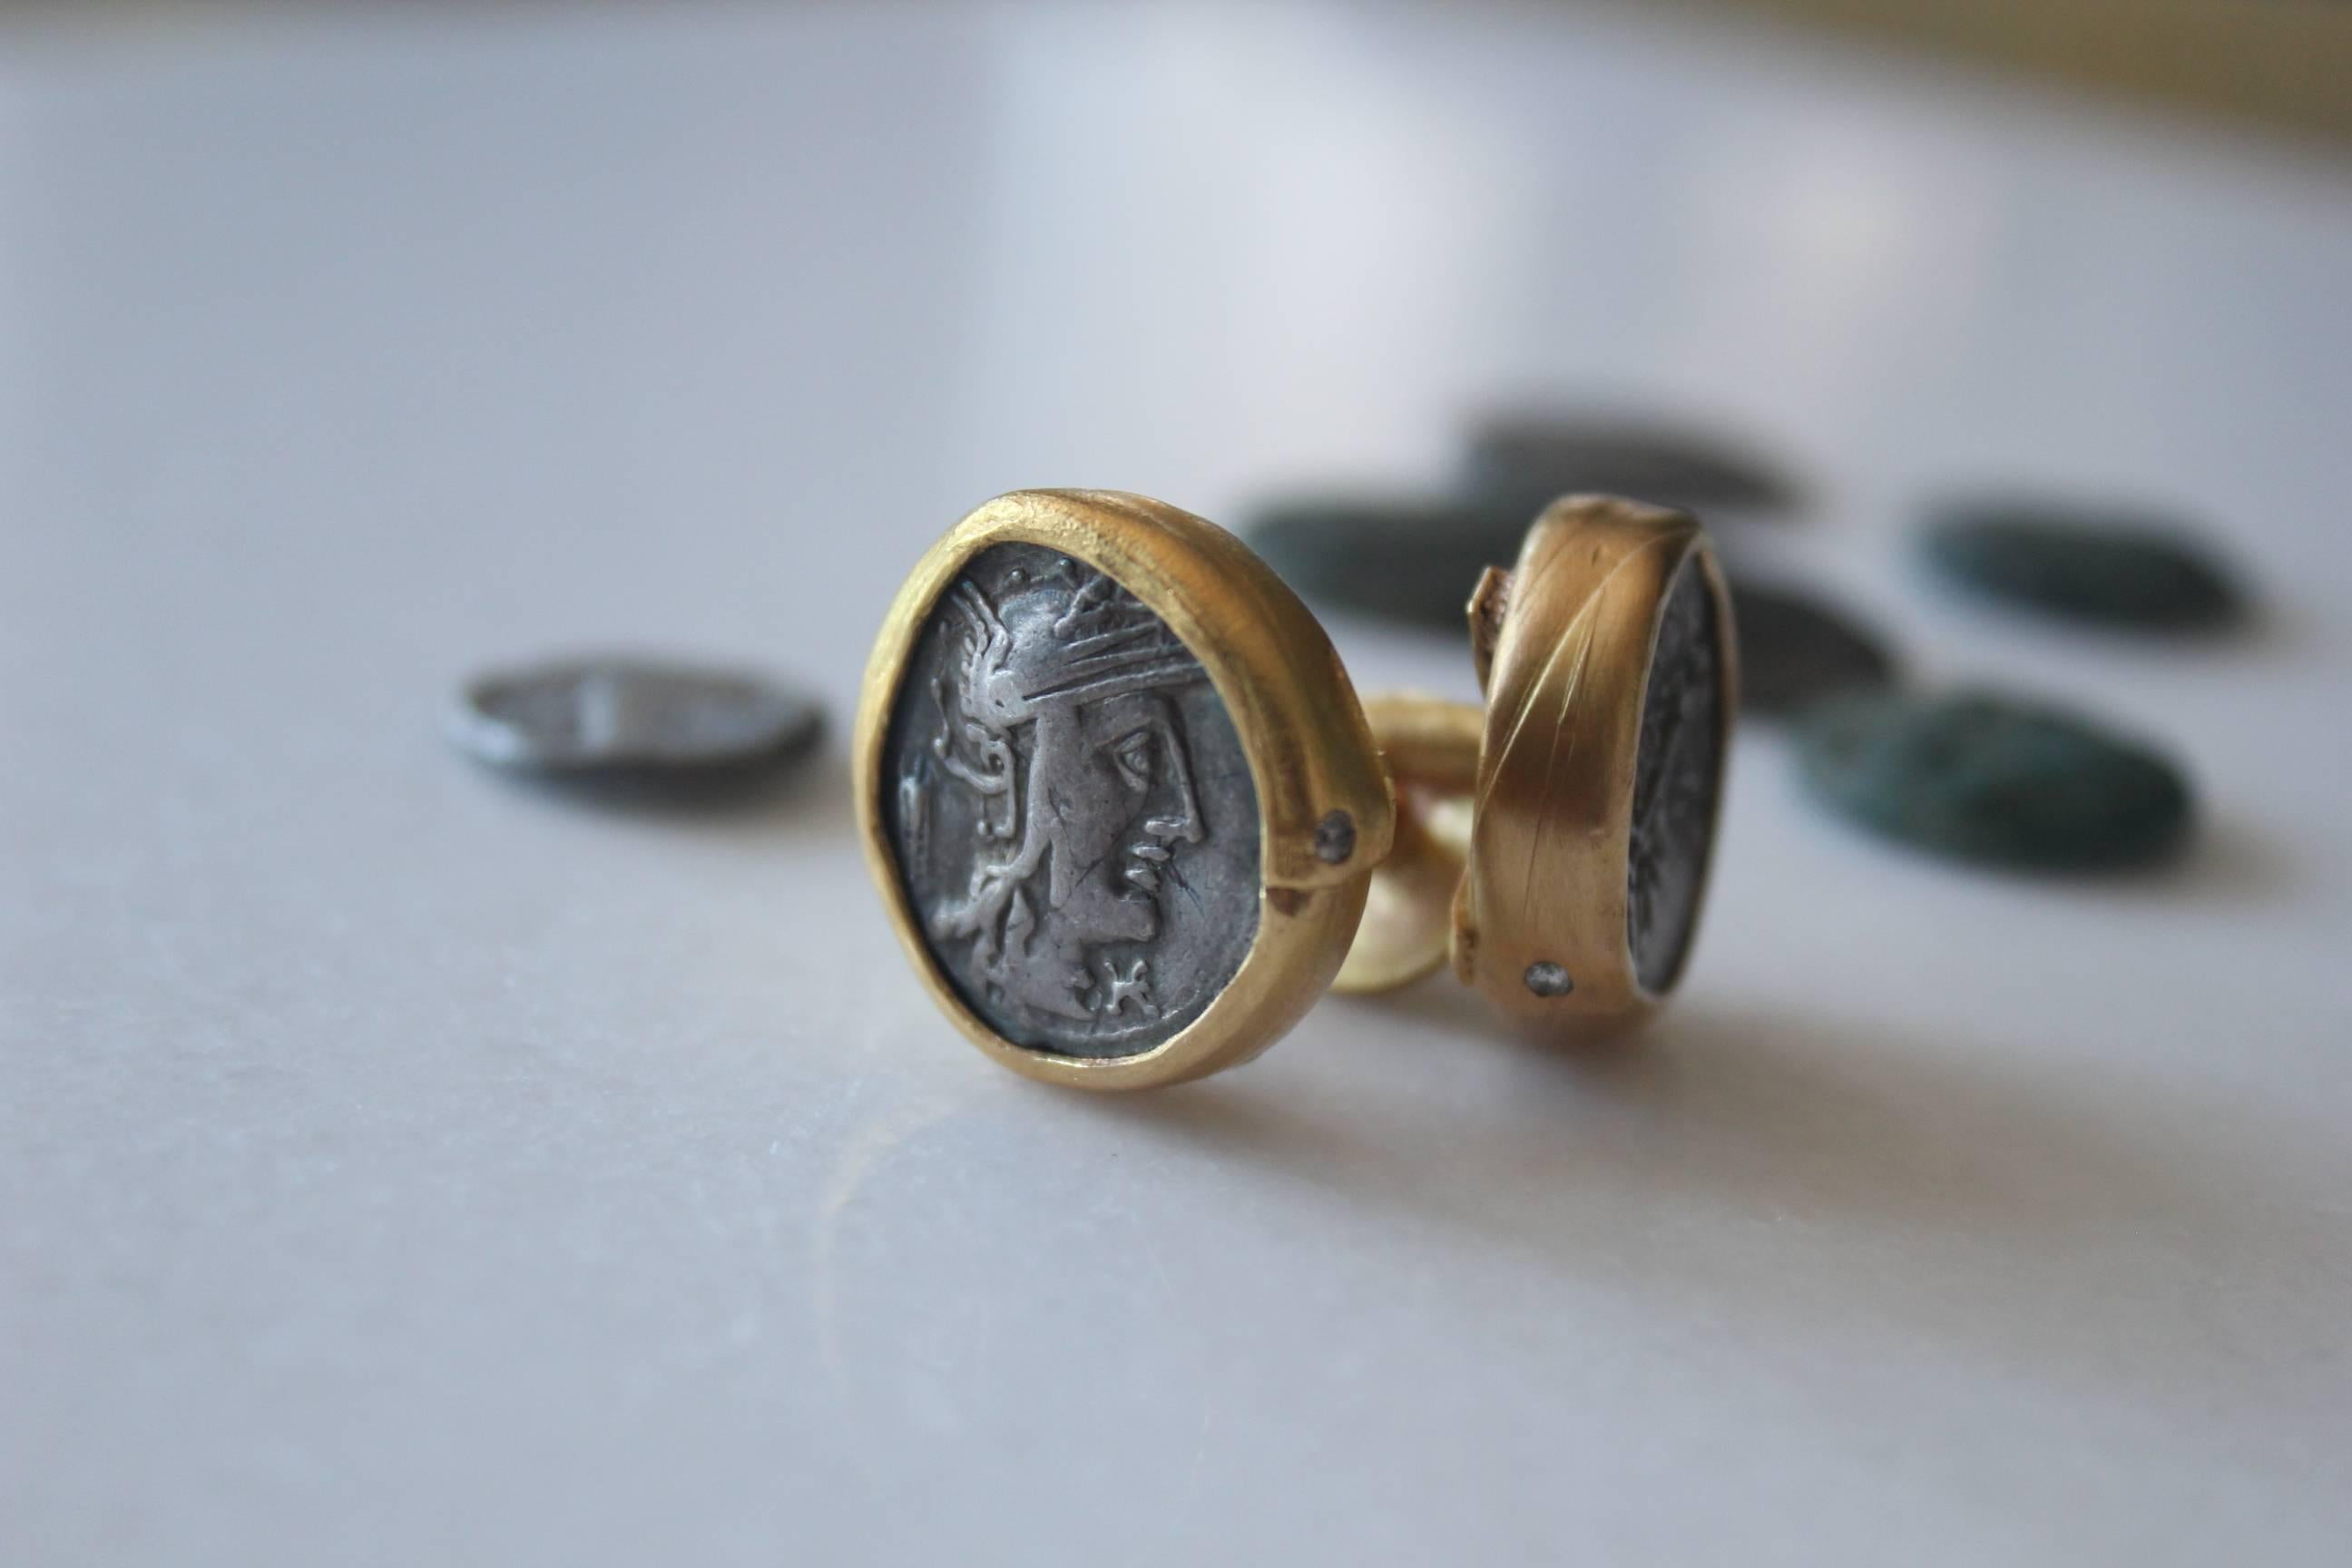 Contemporary Antique Silver Roman Coin Set in 22K-21K Gold Cuff Links with Diamonds Cufflinks